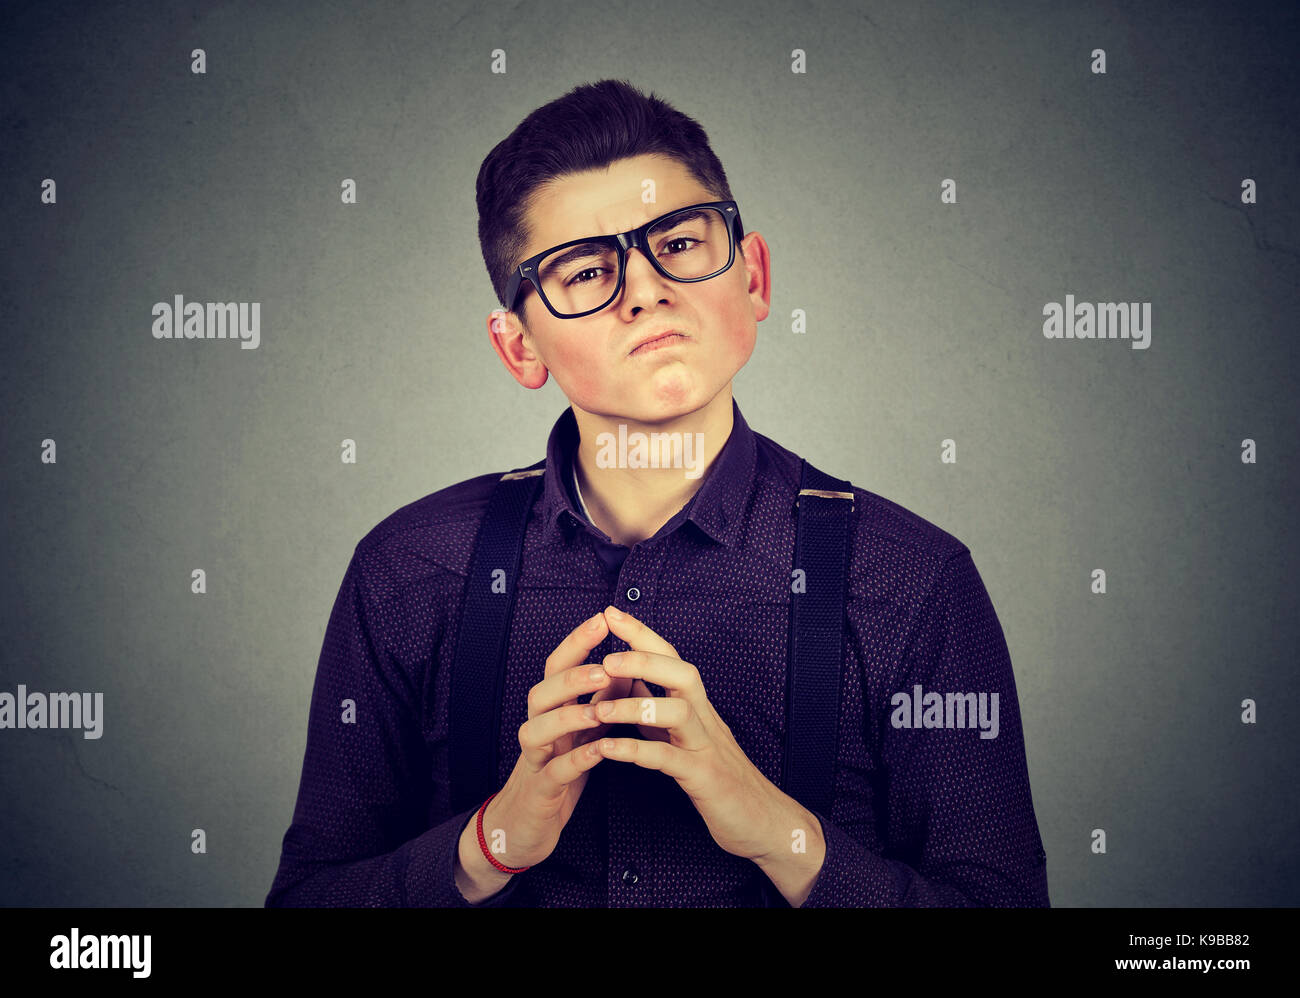 Young man with snobbish face expression Stock Photo